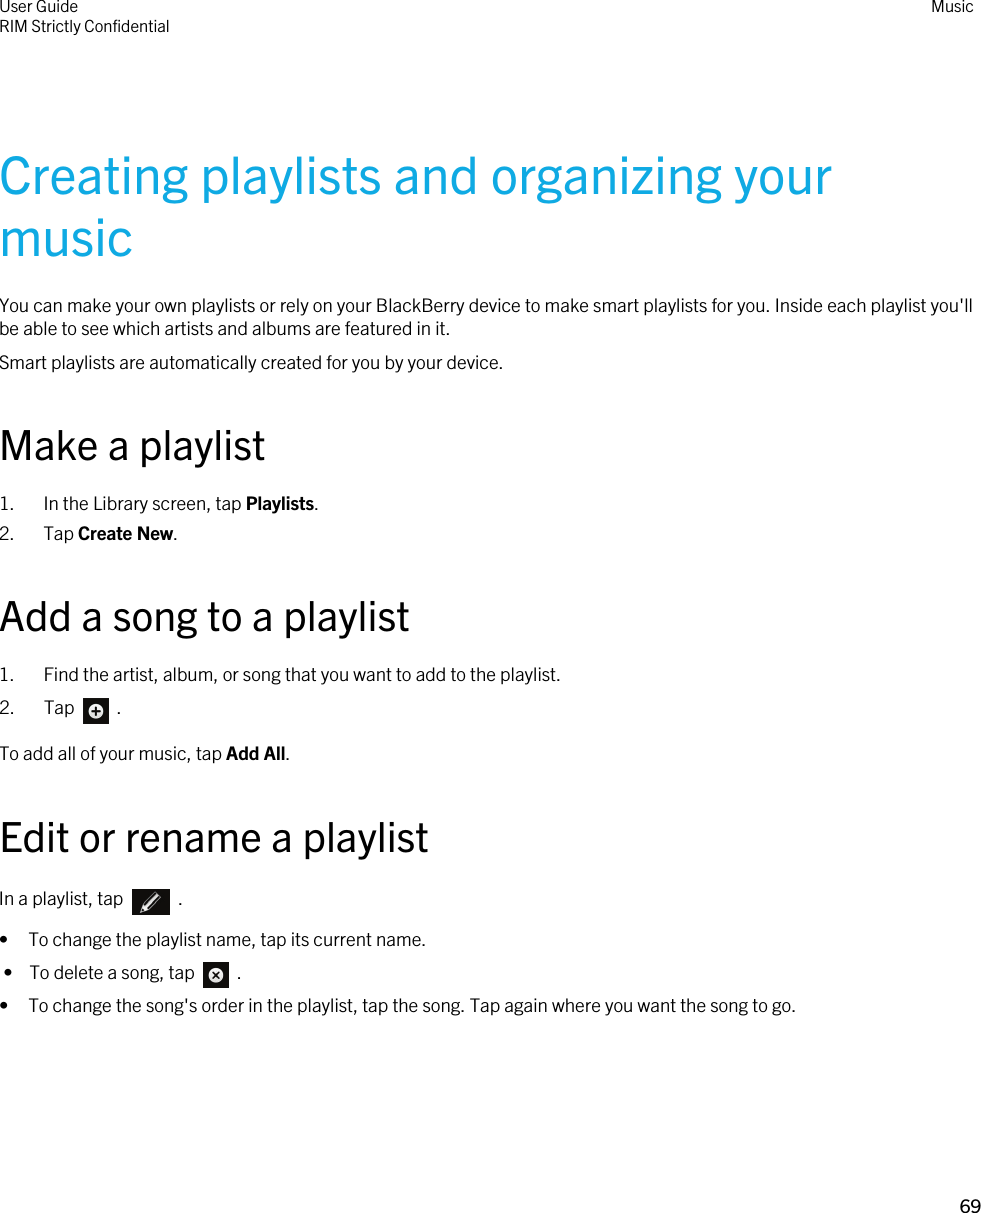 Creating playlists and organizing your musicYou can make your own playlists or rely on your BlackBerry device to make smart playlists for you. Inside each playlist you&apos;ll be able to see which artists and albums are featured in it.Smart playlists are automatically created for you by your device.Make a playlist1. In the Library screen, tap Playlists.2. Tap Create New.Add a song to a playlist1. Find the artist, album, or song that you want to add to the playlist.2.  Tap    .To add all of your music, tap Add All.Edit or rename a playlistIn a playlist, tap    .• To change the playlist name, tap its current name. •  To delete a song, tap    .• To change the song&apos;s order in the playlist, tap the song. Tap again where you want the song to go.User GuideRIM Strictly Confidential Music69 